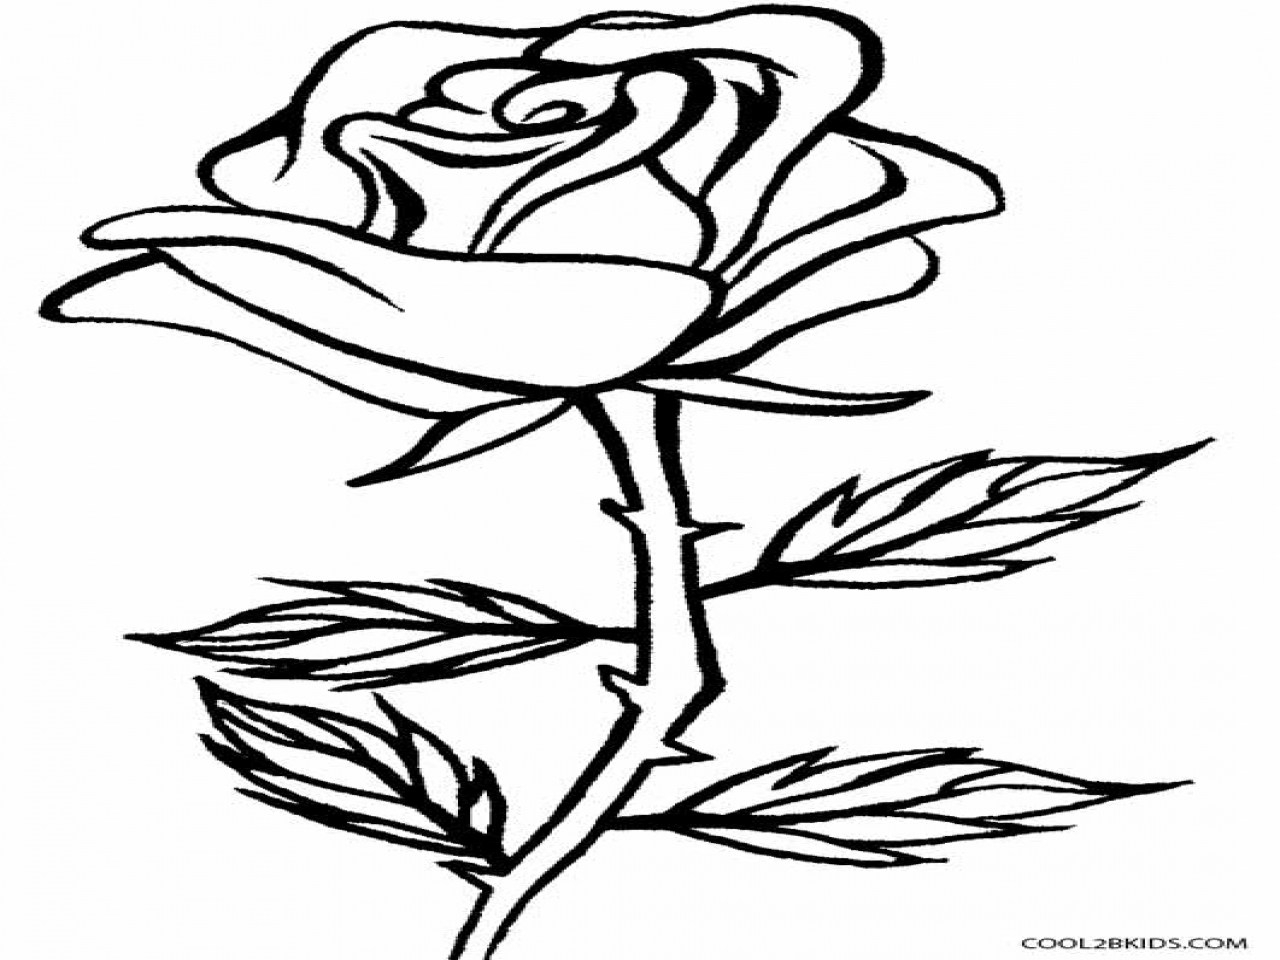 Coloring Pages Of Crosses With Flowers Cross With Flowers Drawing Free Download Best Cross With Flowers